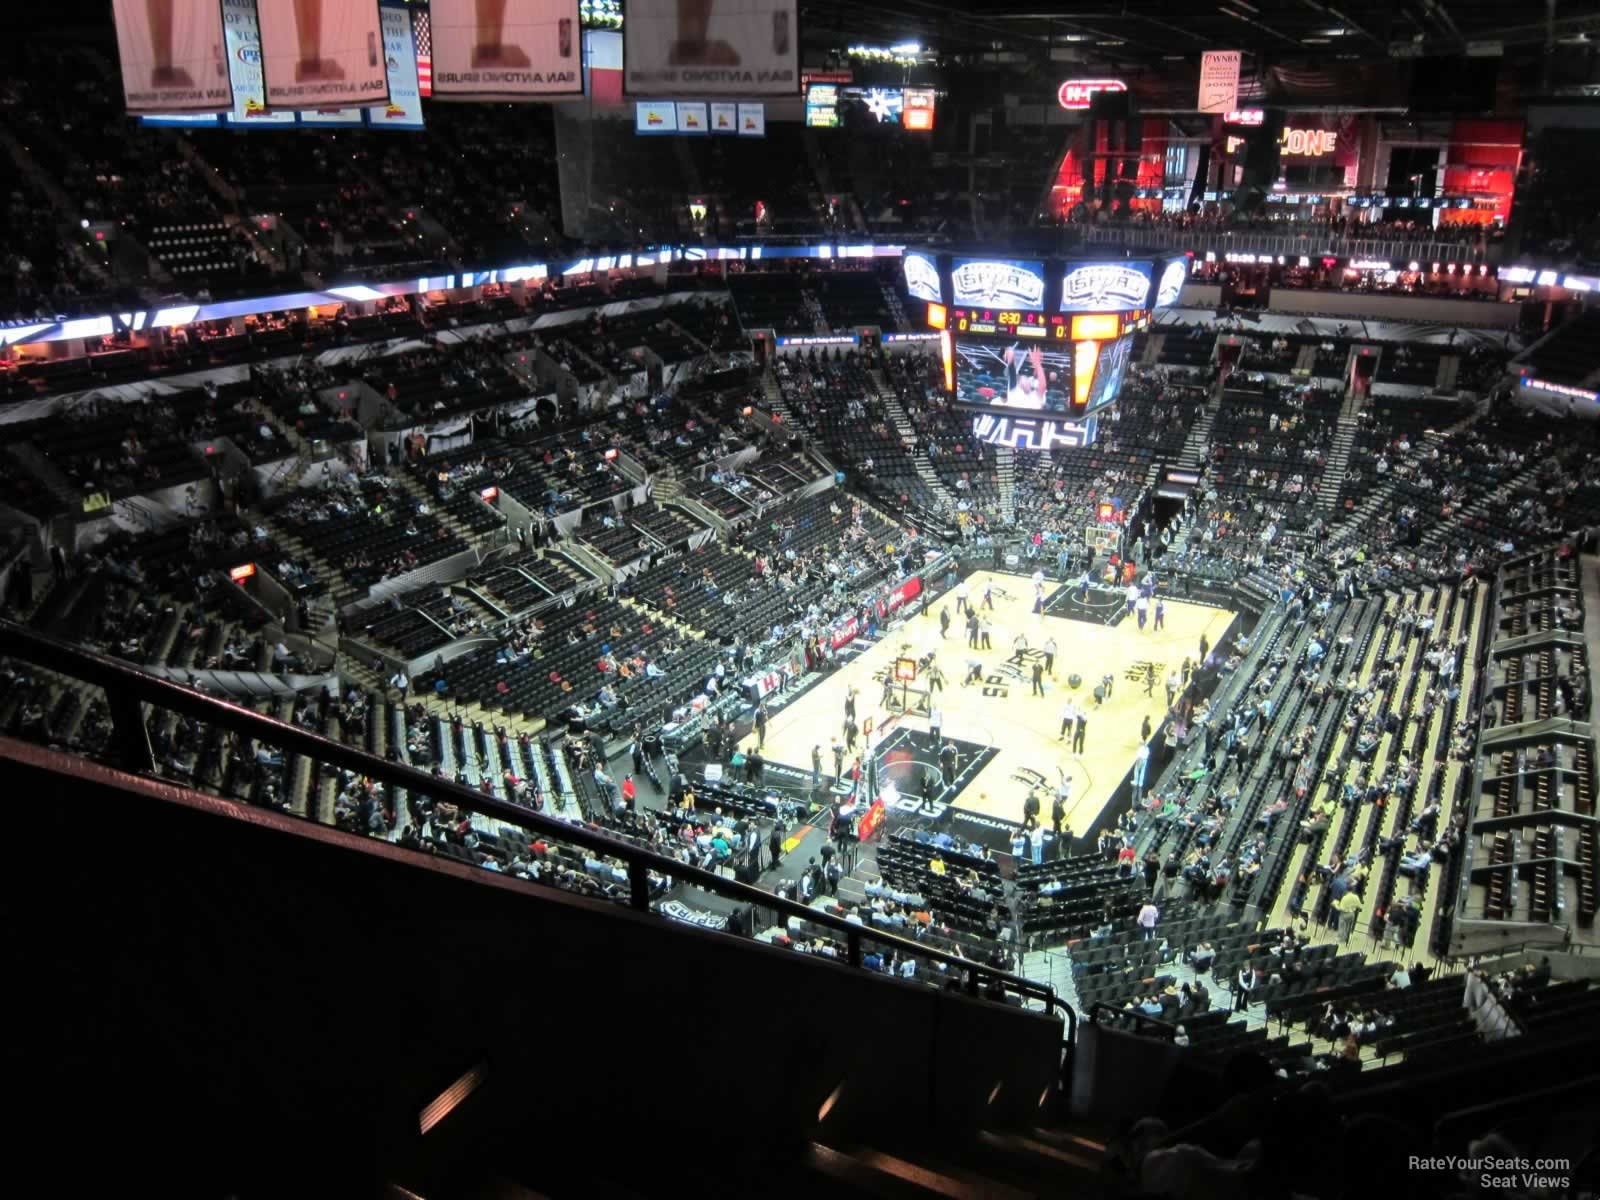 section 230, row 12 seat view  for basketball - at&t center